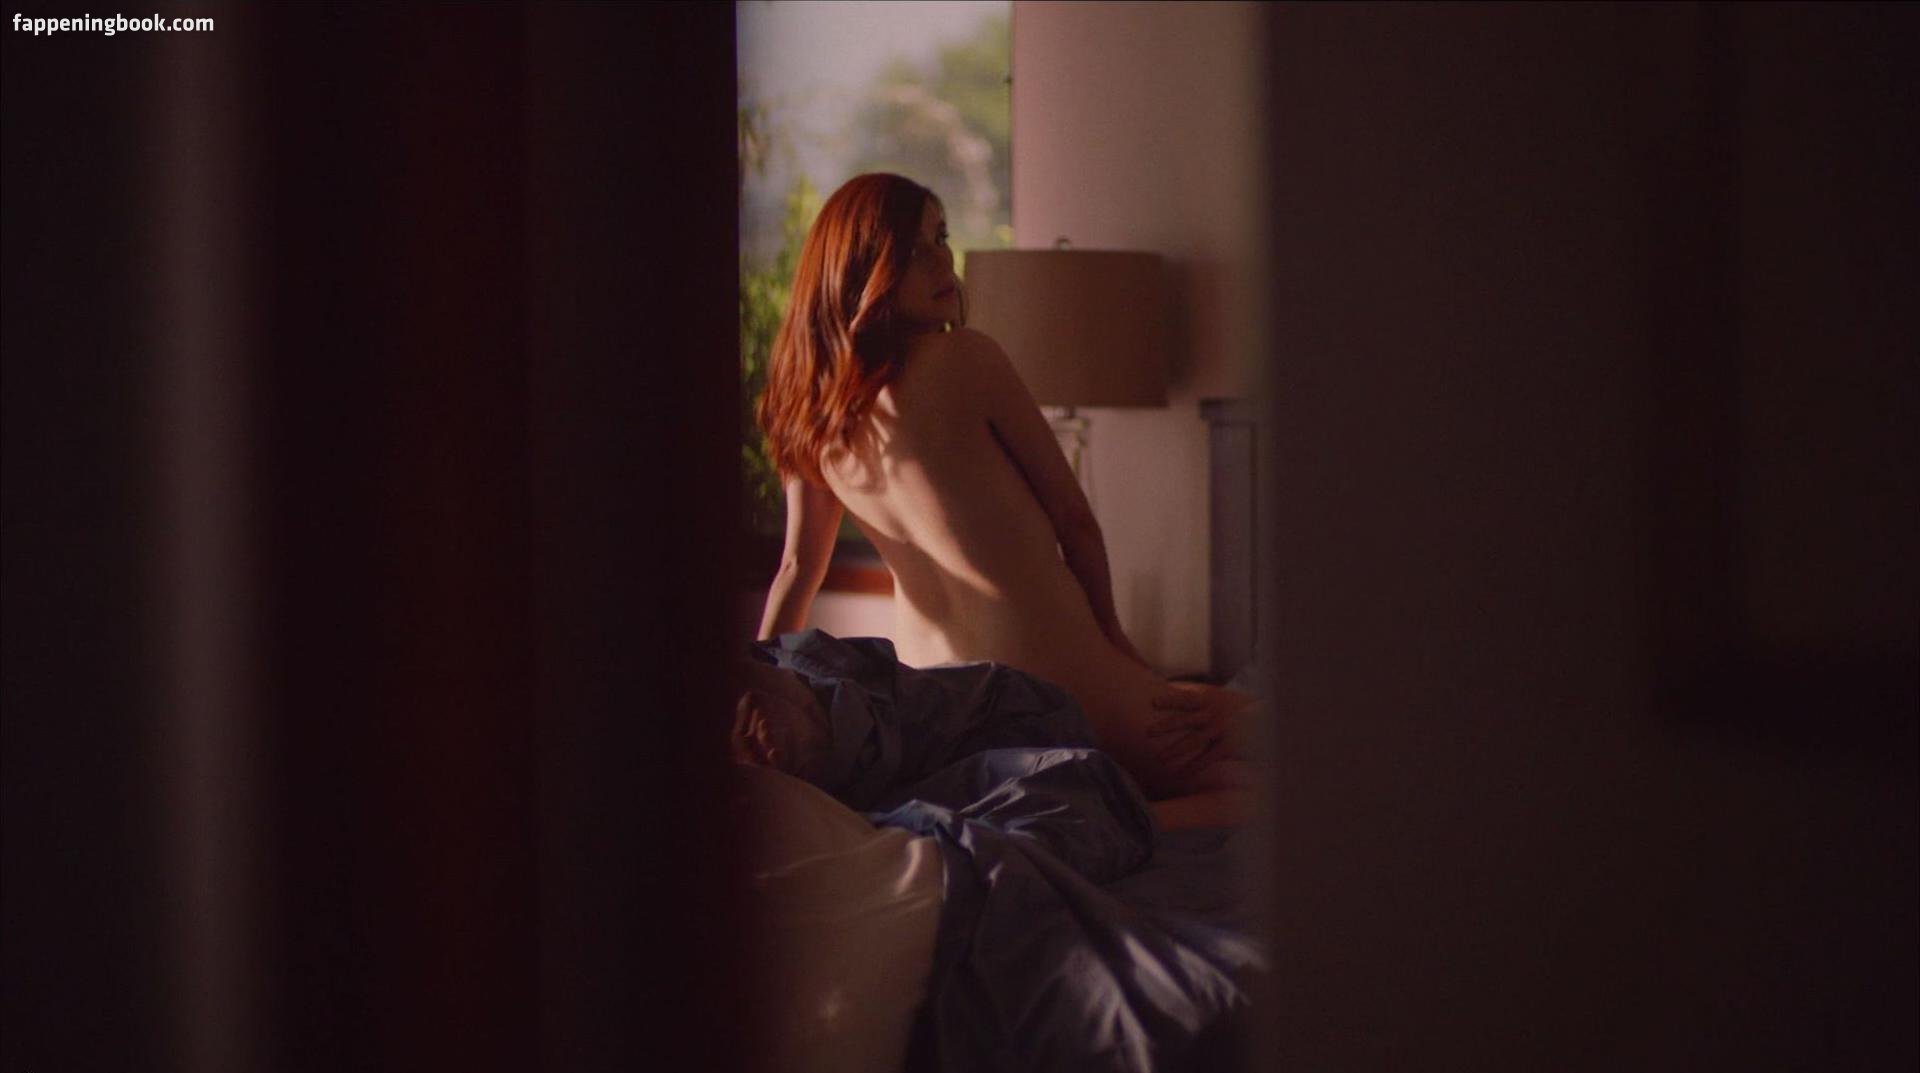 Aya Cash Nude, The Fappening - Photo #60406 - FappeningBook.